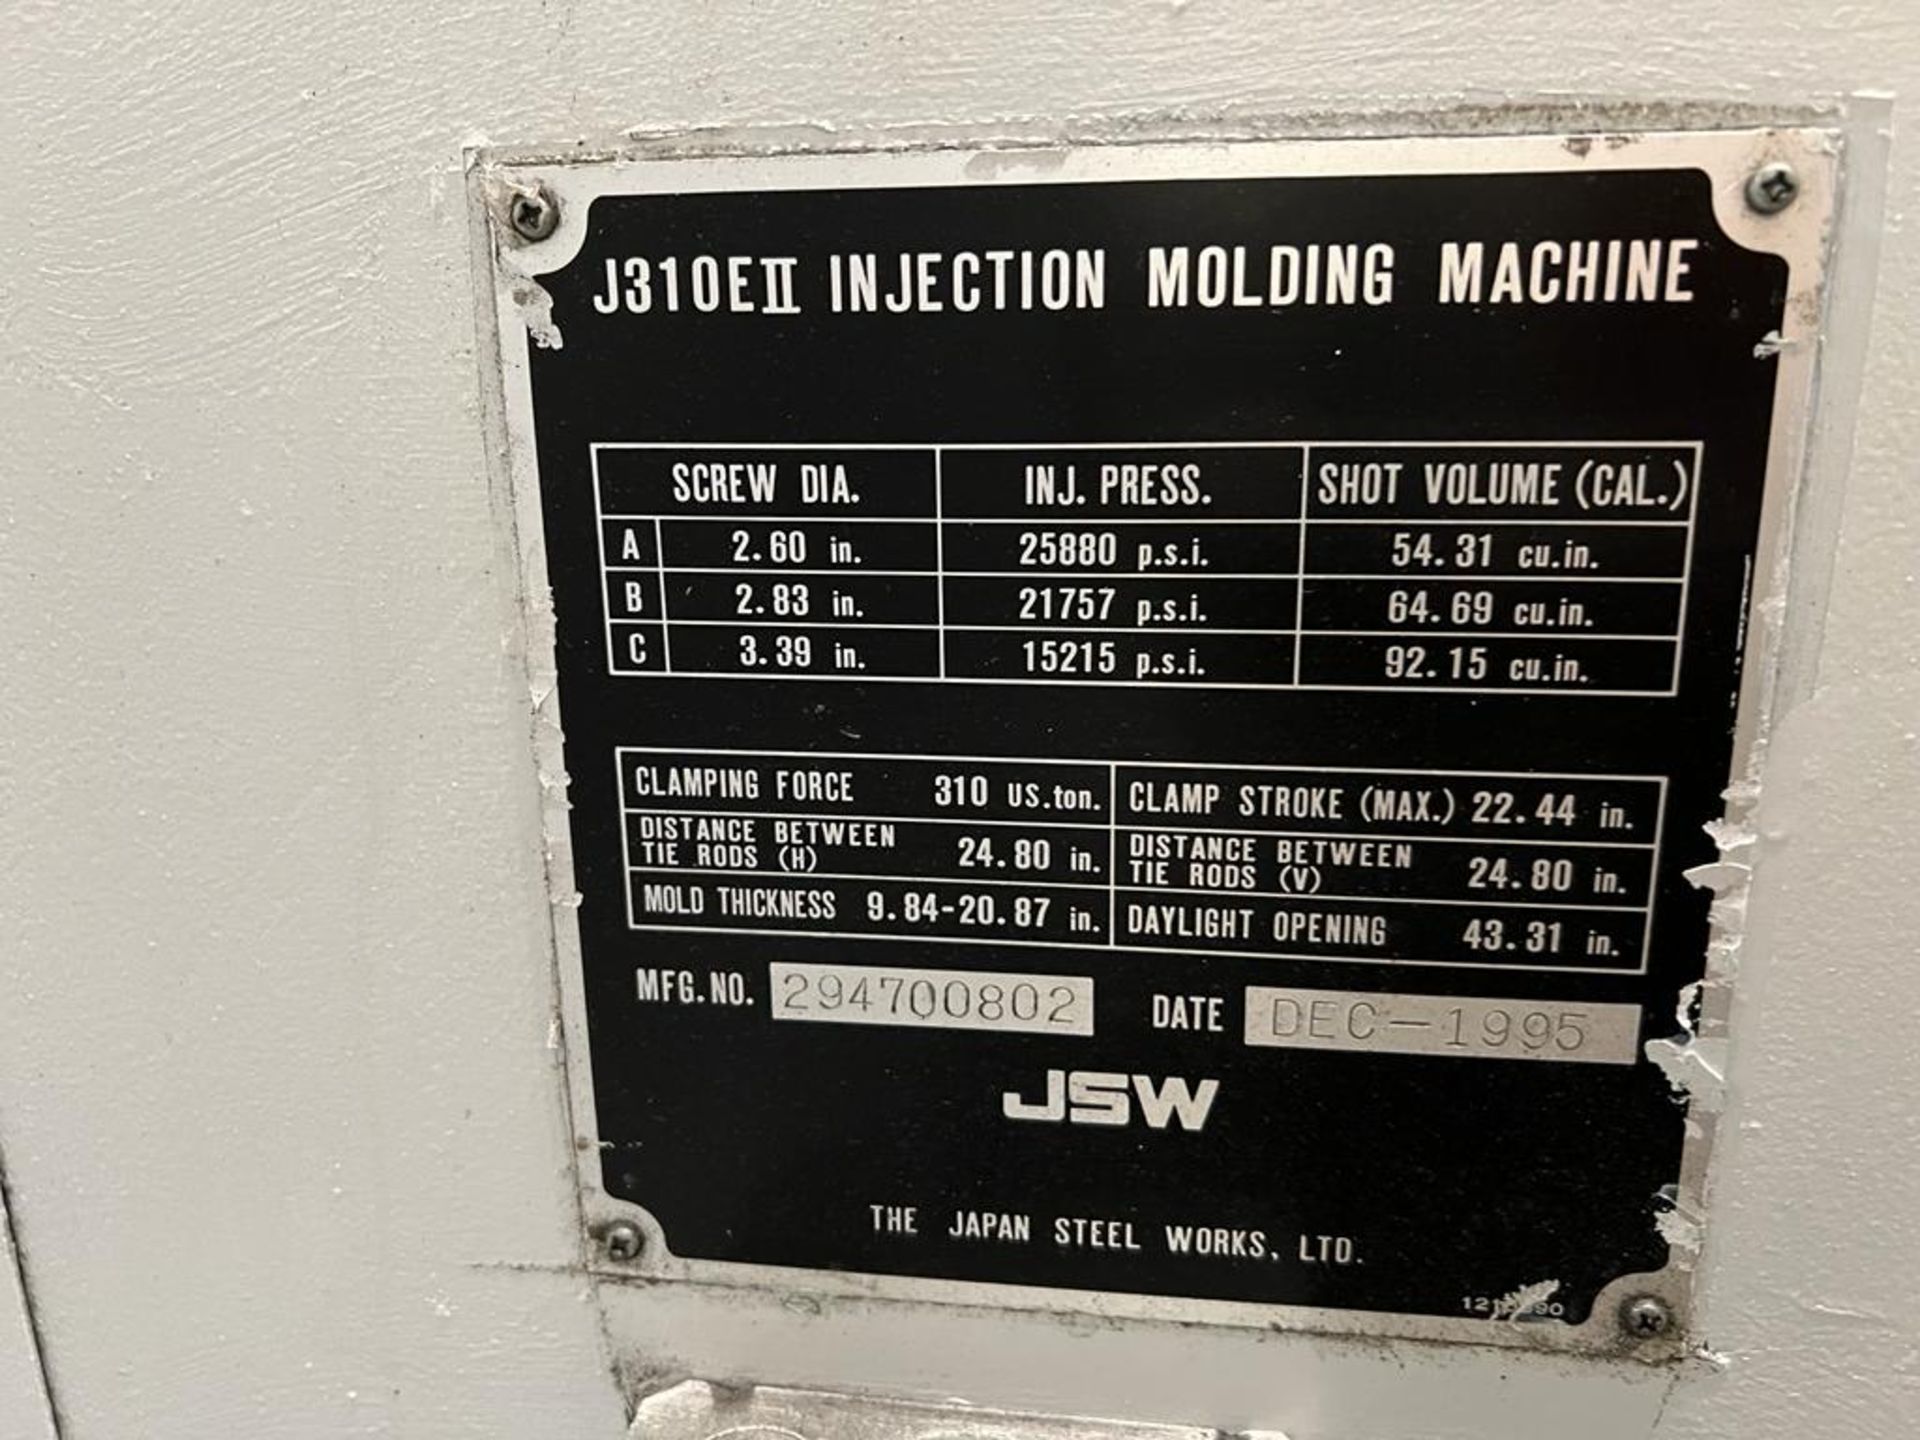 JSW MODEL 310E II, 310 TON PLASTIC INJECTION MOLDING MACHINE, 22.44’’, 64.69 Shot Size. SOLD AS-IS - Image 6 of 9